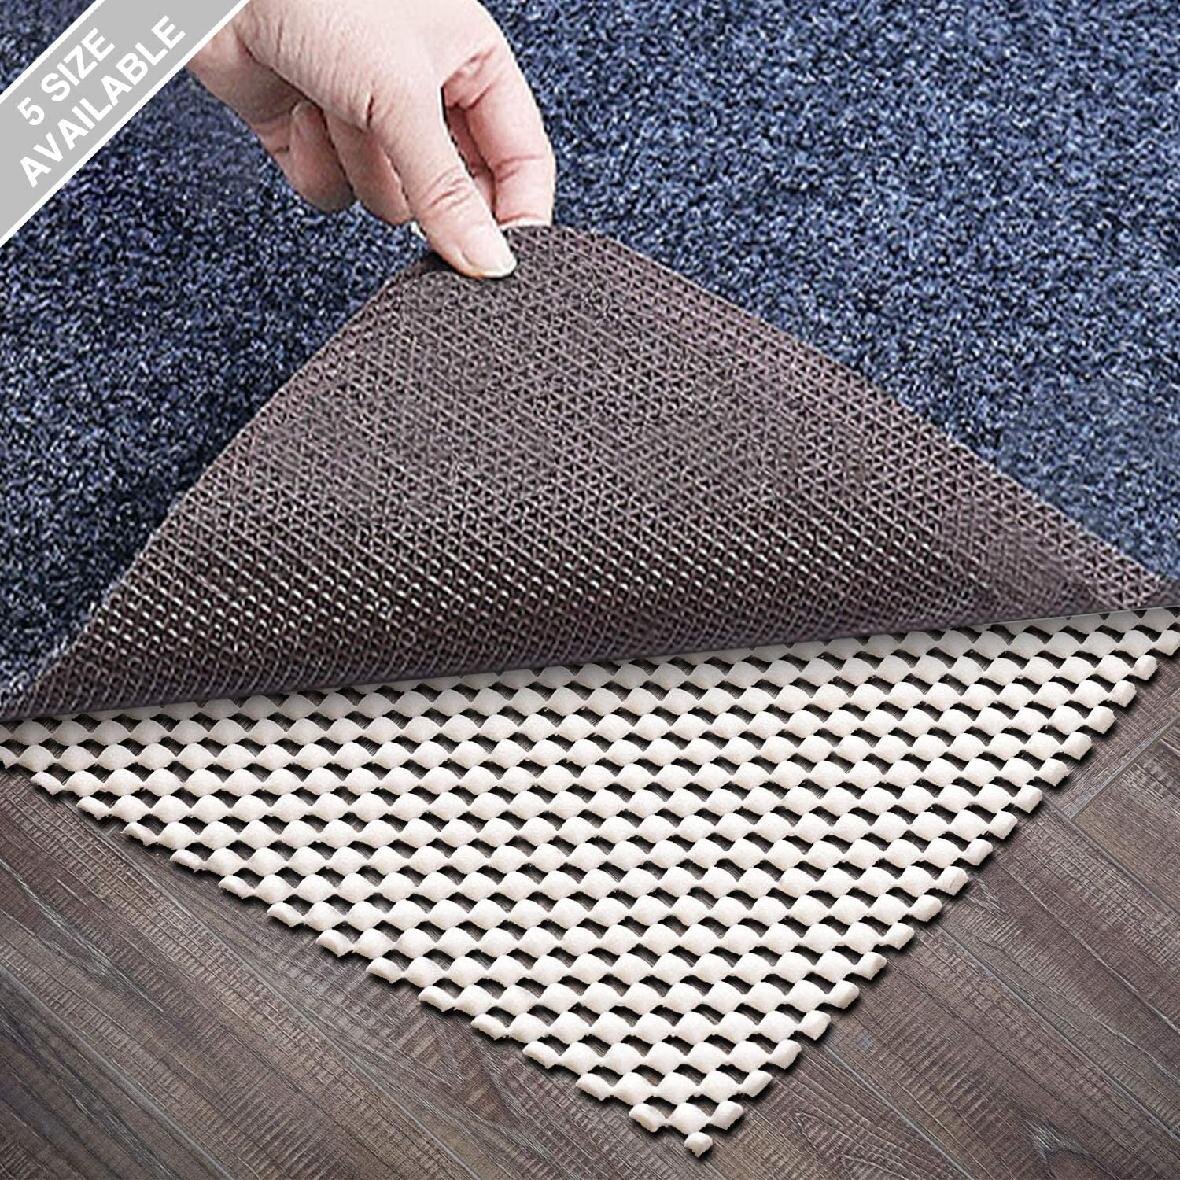 Provides Protection and Cushion 8x10 Strong Grip Carpet pad for Area Rugs and Hardwood Floors Non Slip Area Rug Pad Gripper